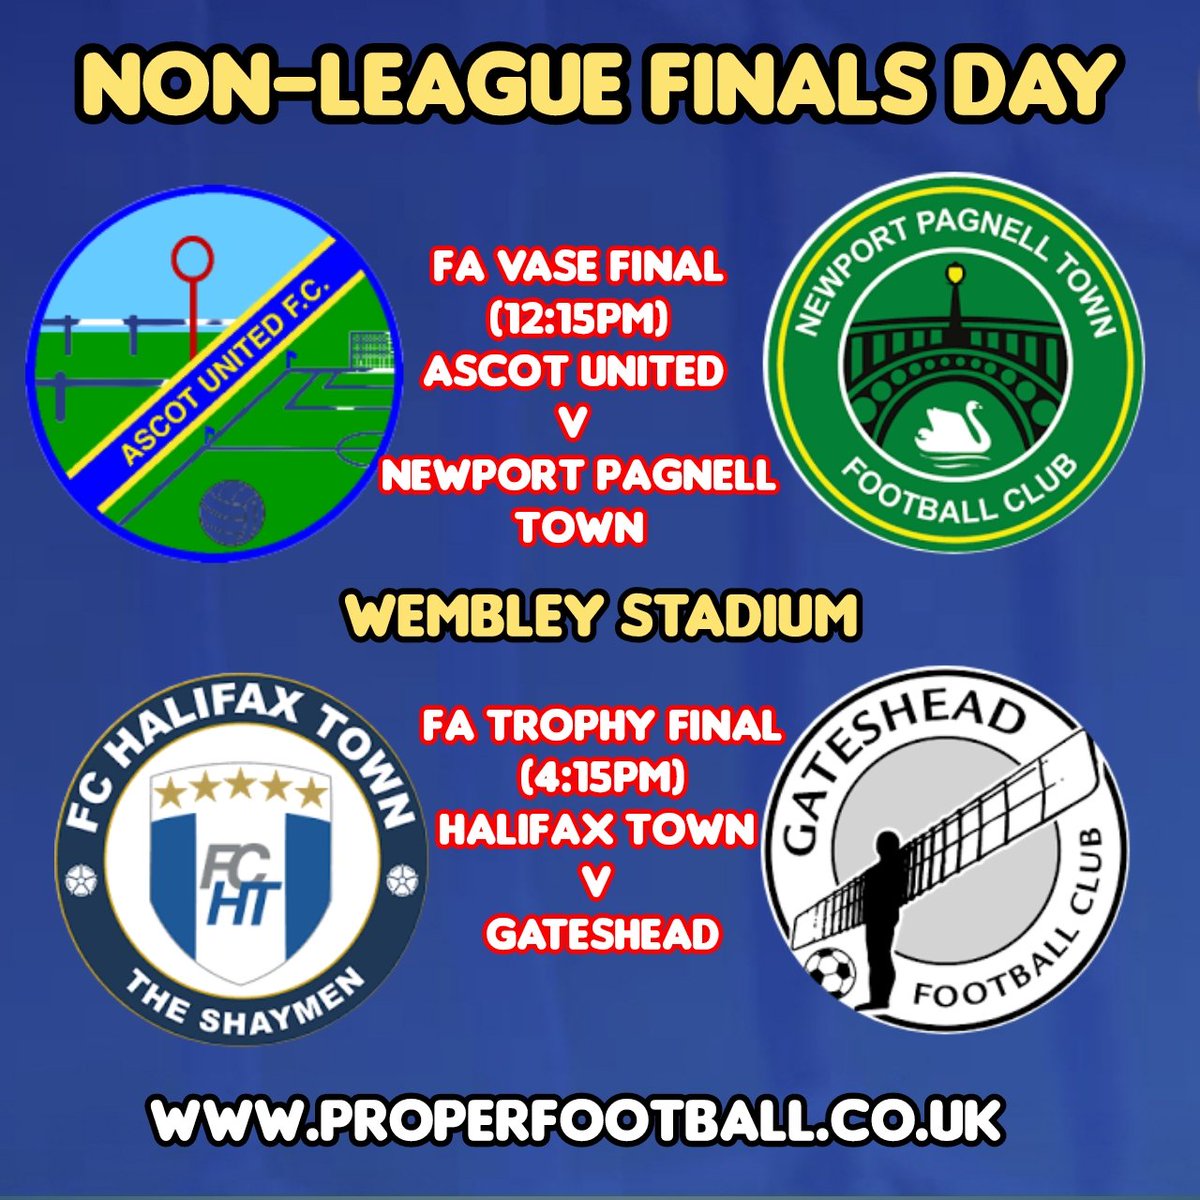 Best of luck to all 4 teams taking part in Non-League finals day at Wembley today.
m.facebook.com/story.php?stor…
@AscotUnitedFC
@nptfc #ascotunited @FCHTOnline @GatesheadFC #newportpagnelltown #gatesheadfc #halifaxtown #FATrophy #FAVase #NonLeague